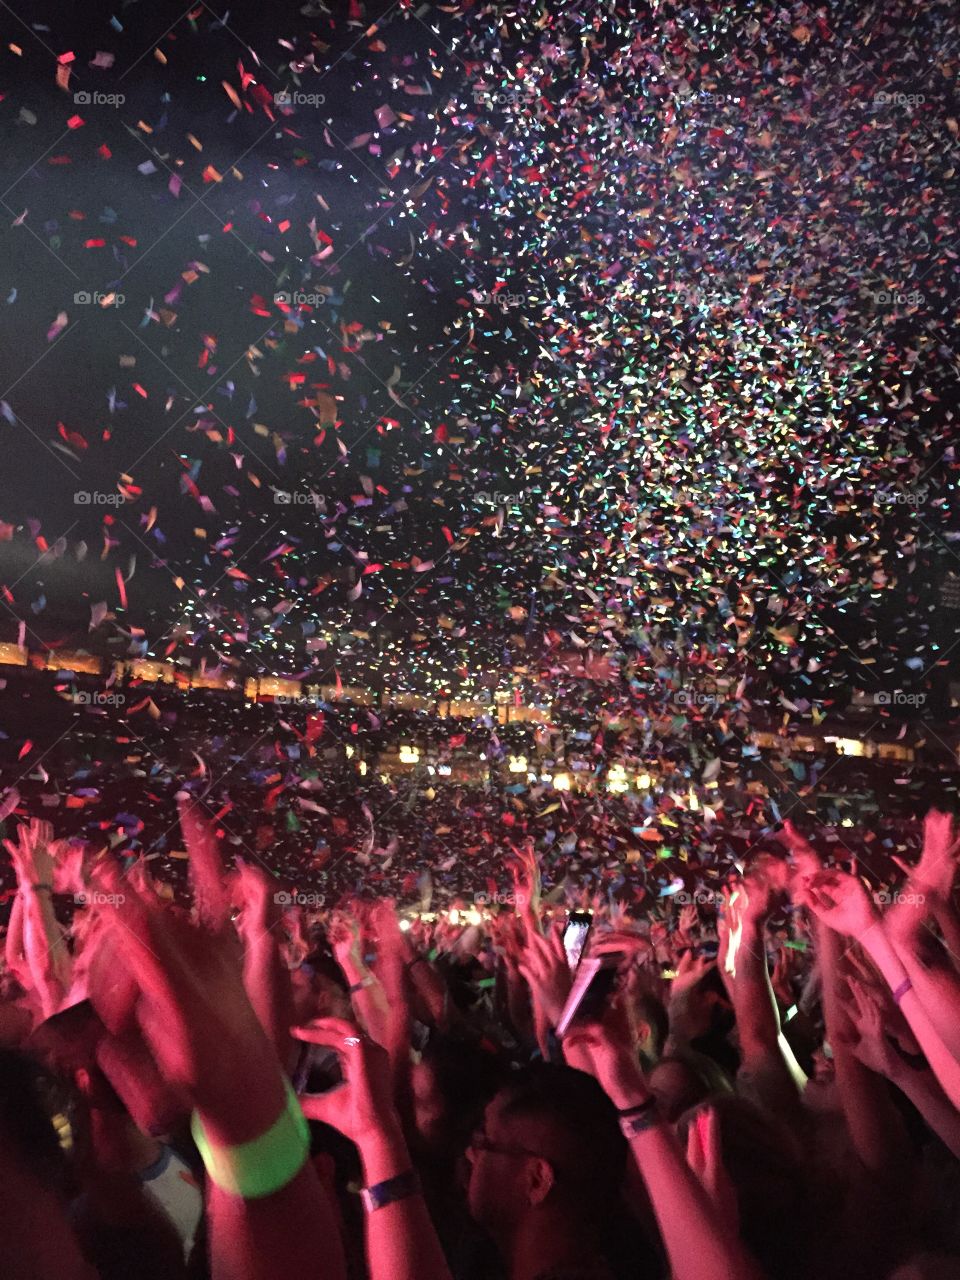 Confetti. Confetti had just exploded during Girltalk's performance at Edgefest 2015, fun ensued